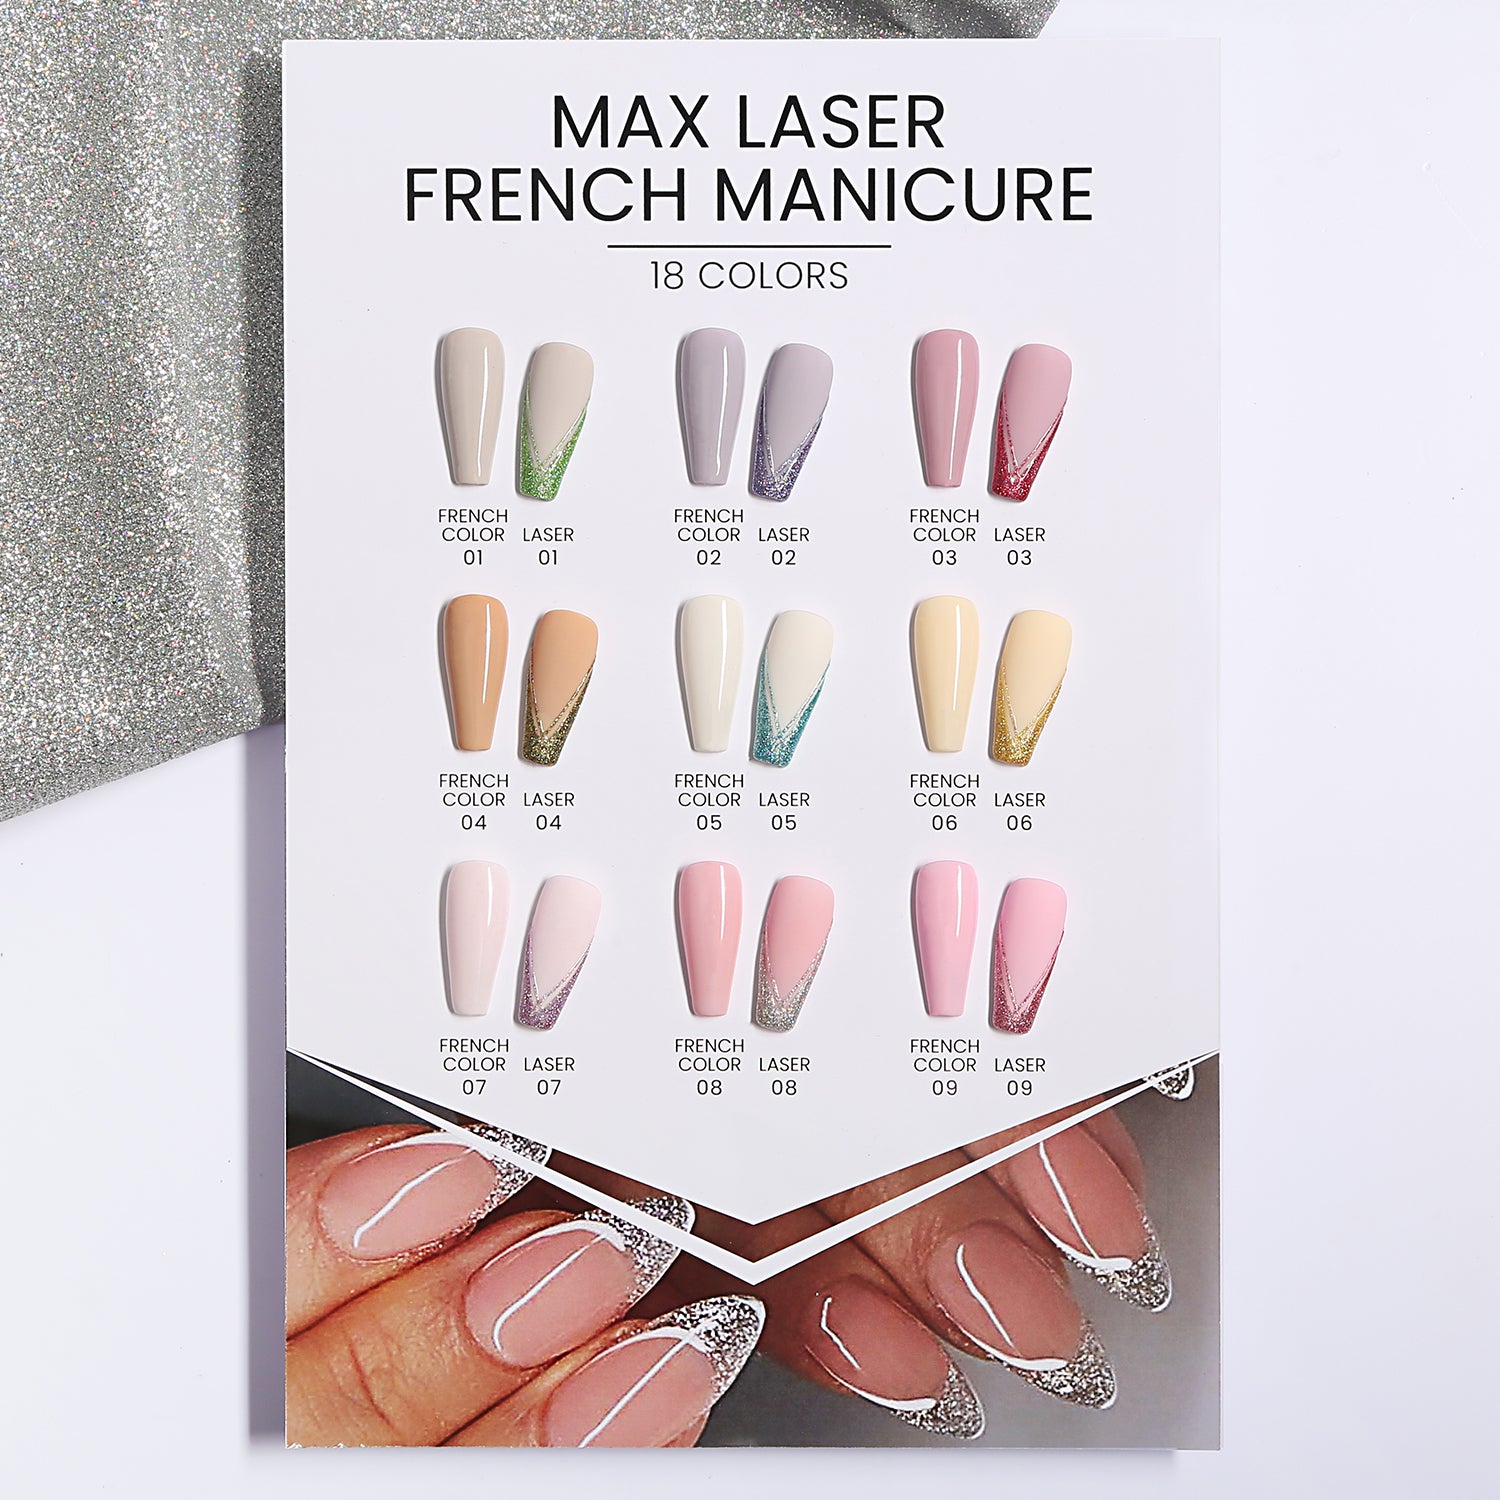 Max Laser French Manicure